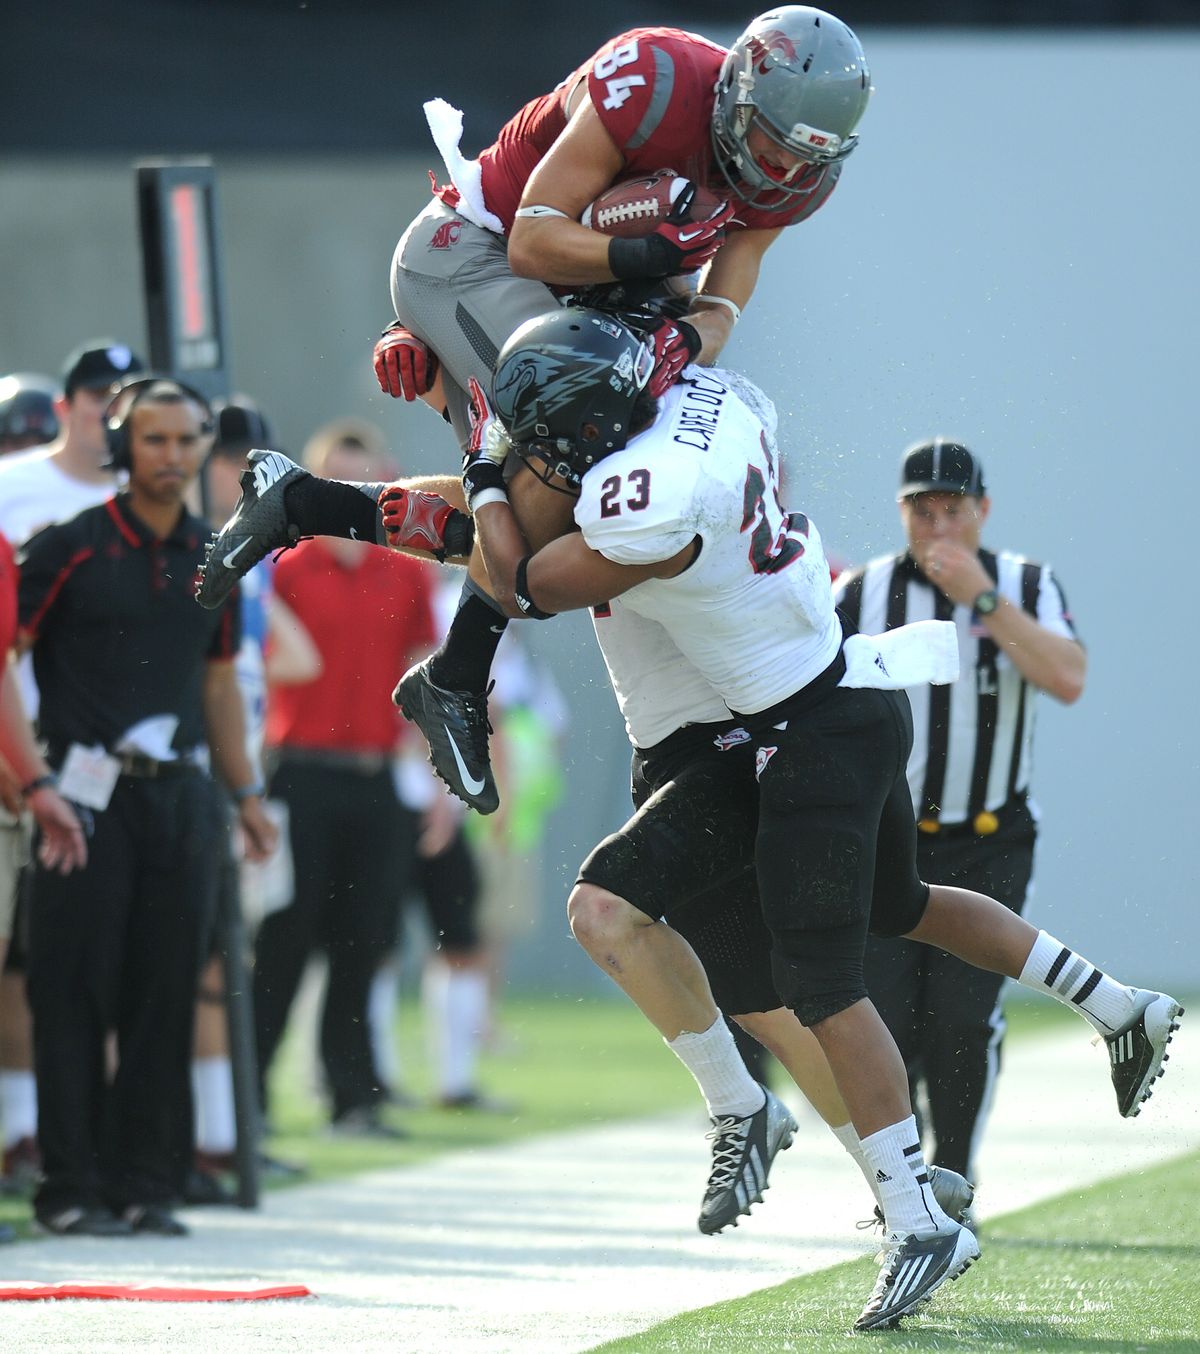 Washington State receiver River Cracraft is forced out of bounds by Southern Utah during the first half. (Tyler Tjomsland)